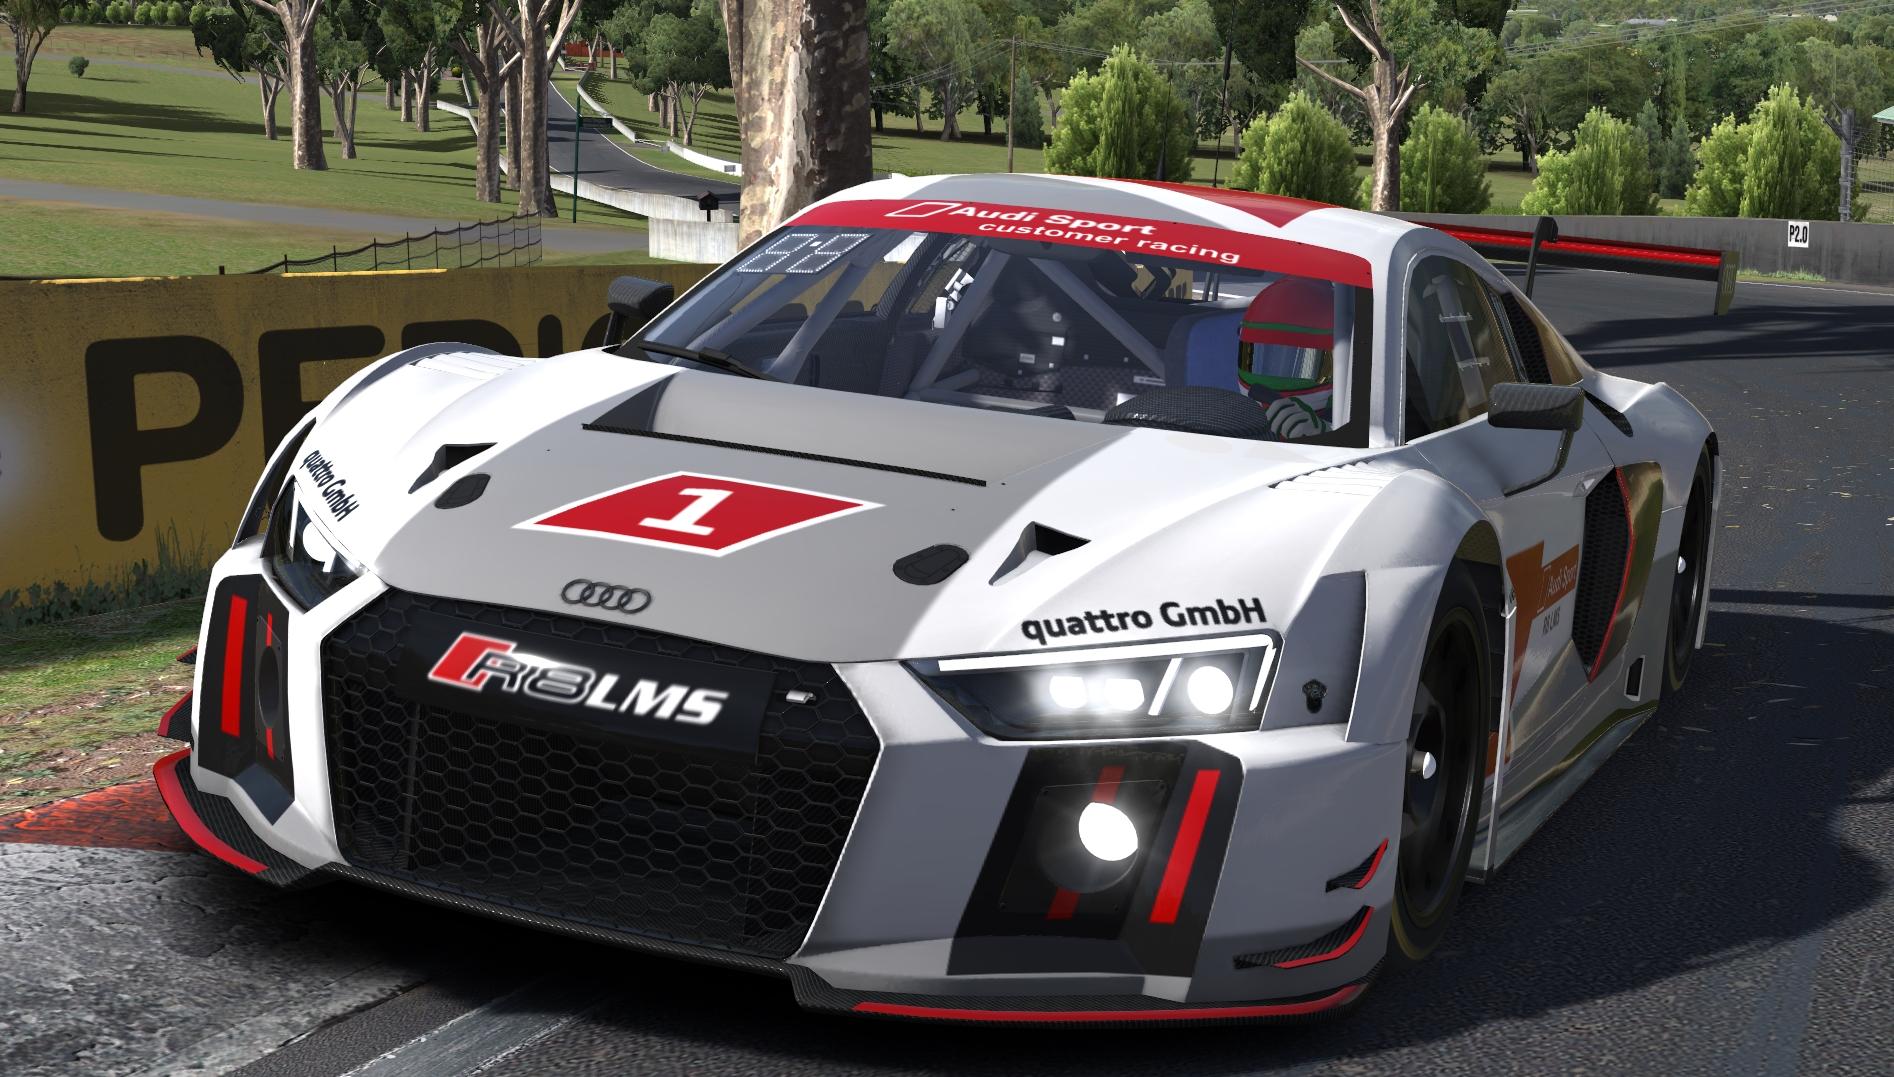 Preview of 2016 Audi Customer Racing R8LMS.tga by John Paquin